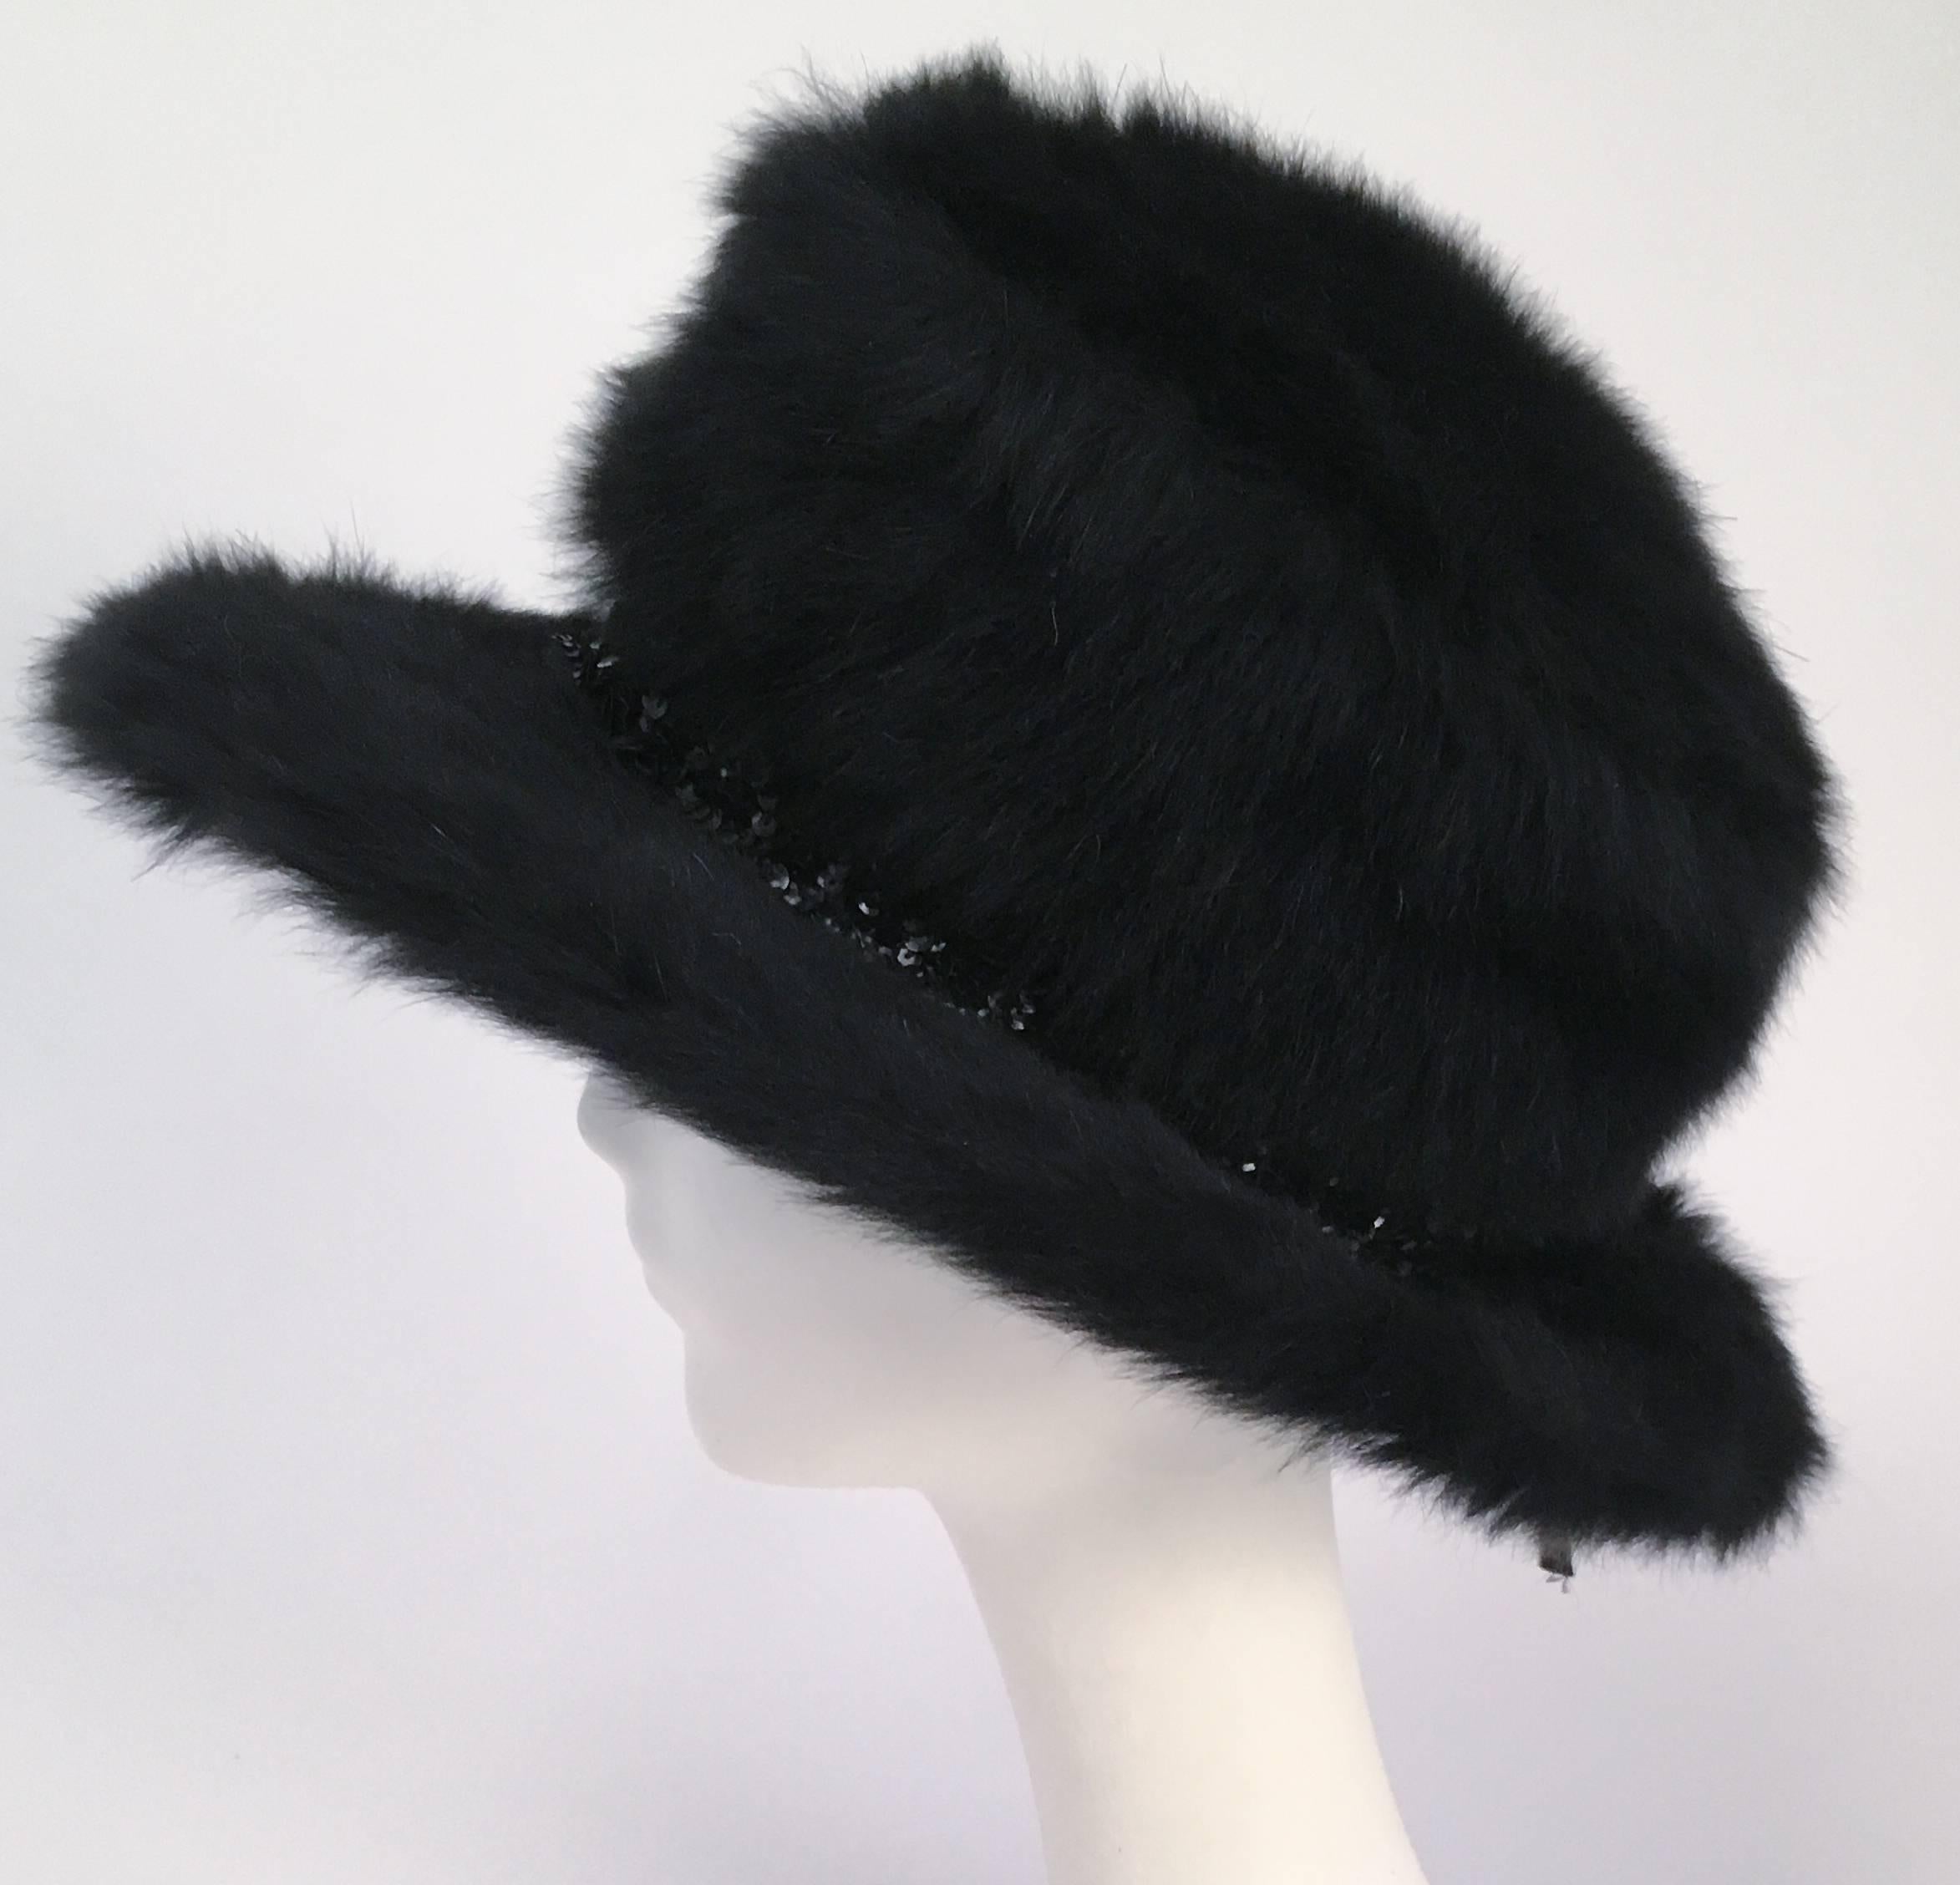 70s Schiaparelli Fur Wide Brim Hat. Sequin band with ribbon bow detail. Contrast turquoise underside. 